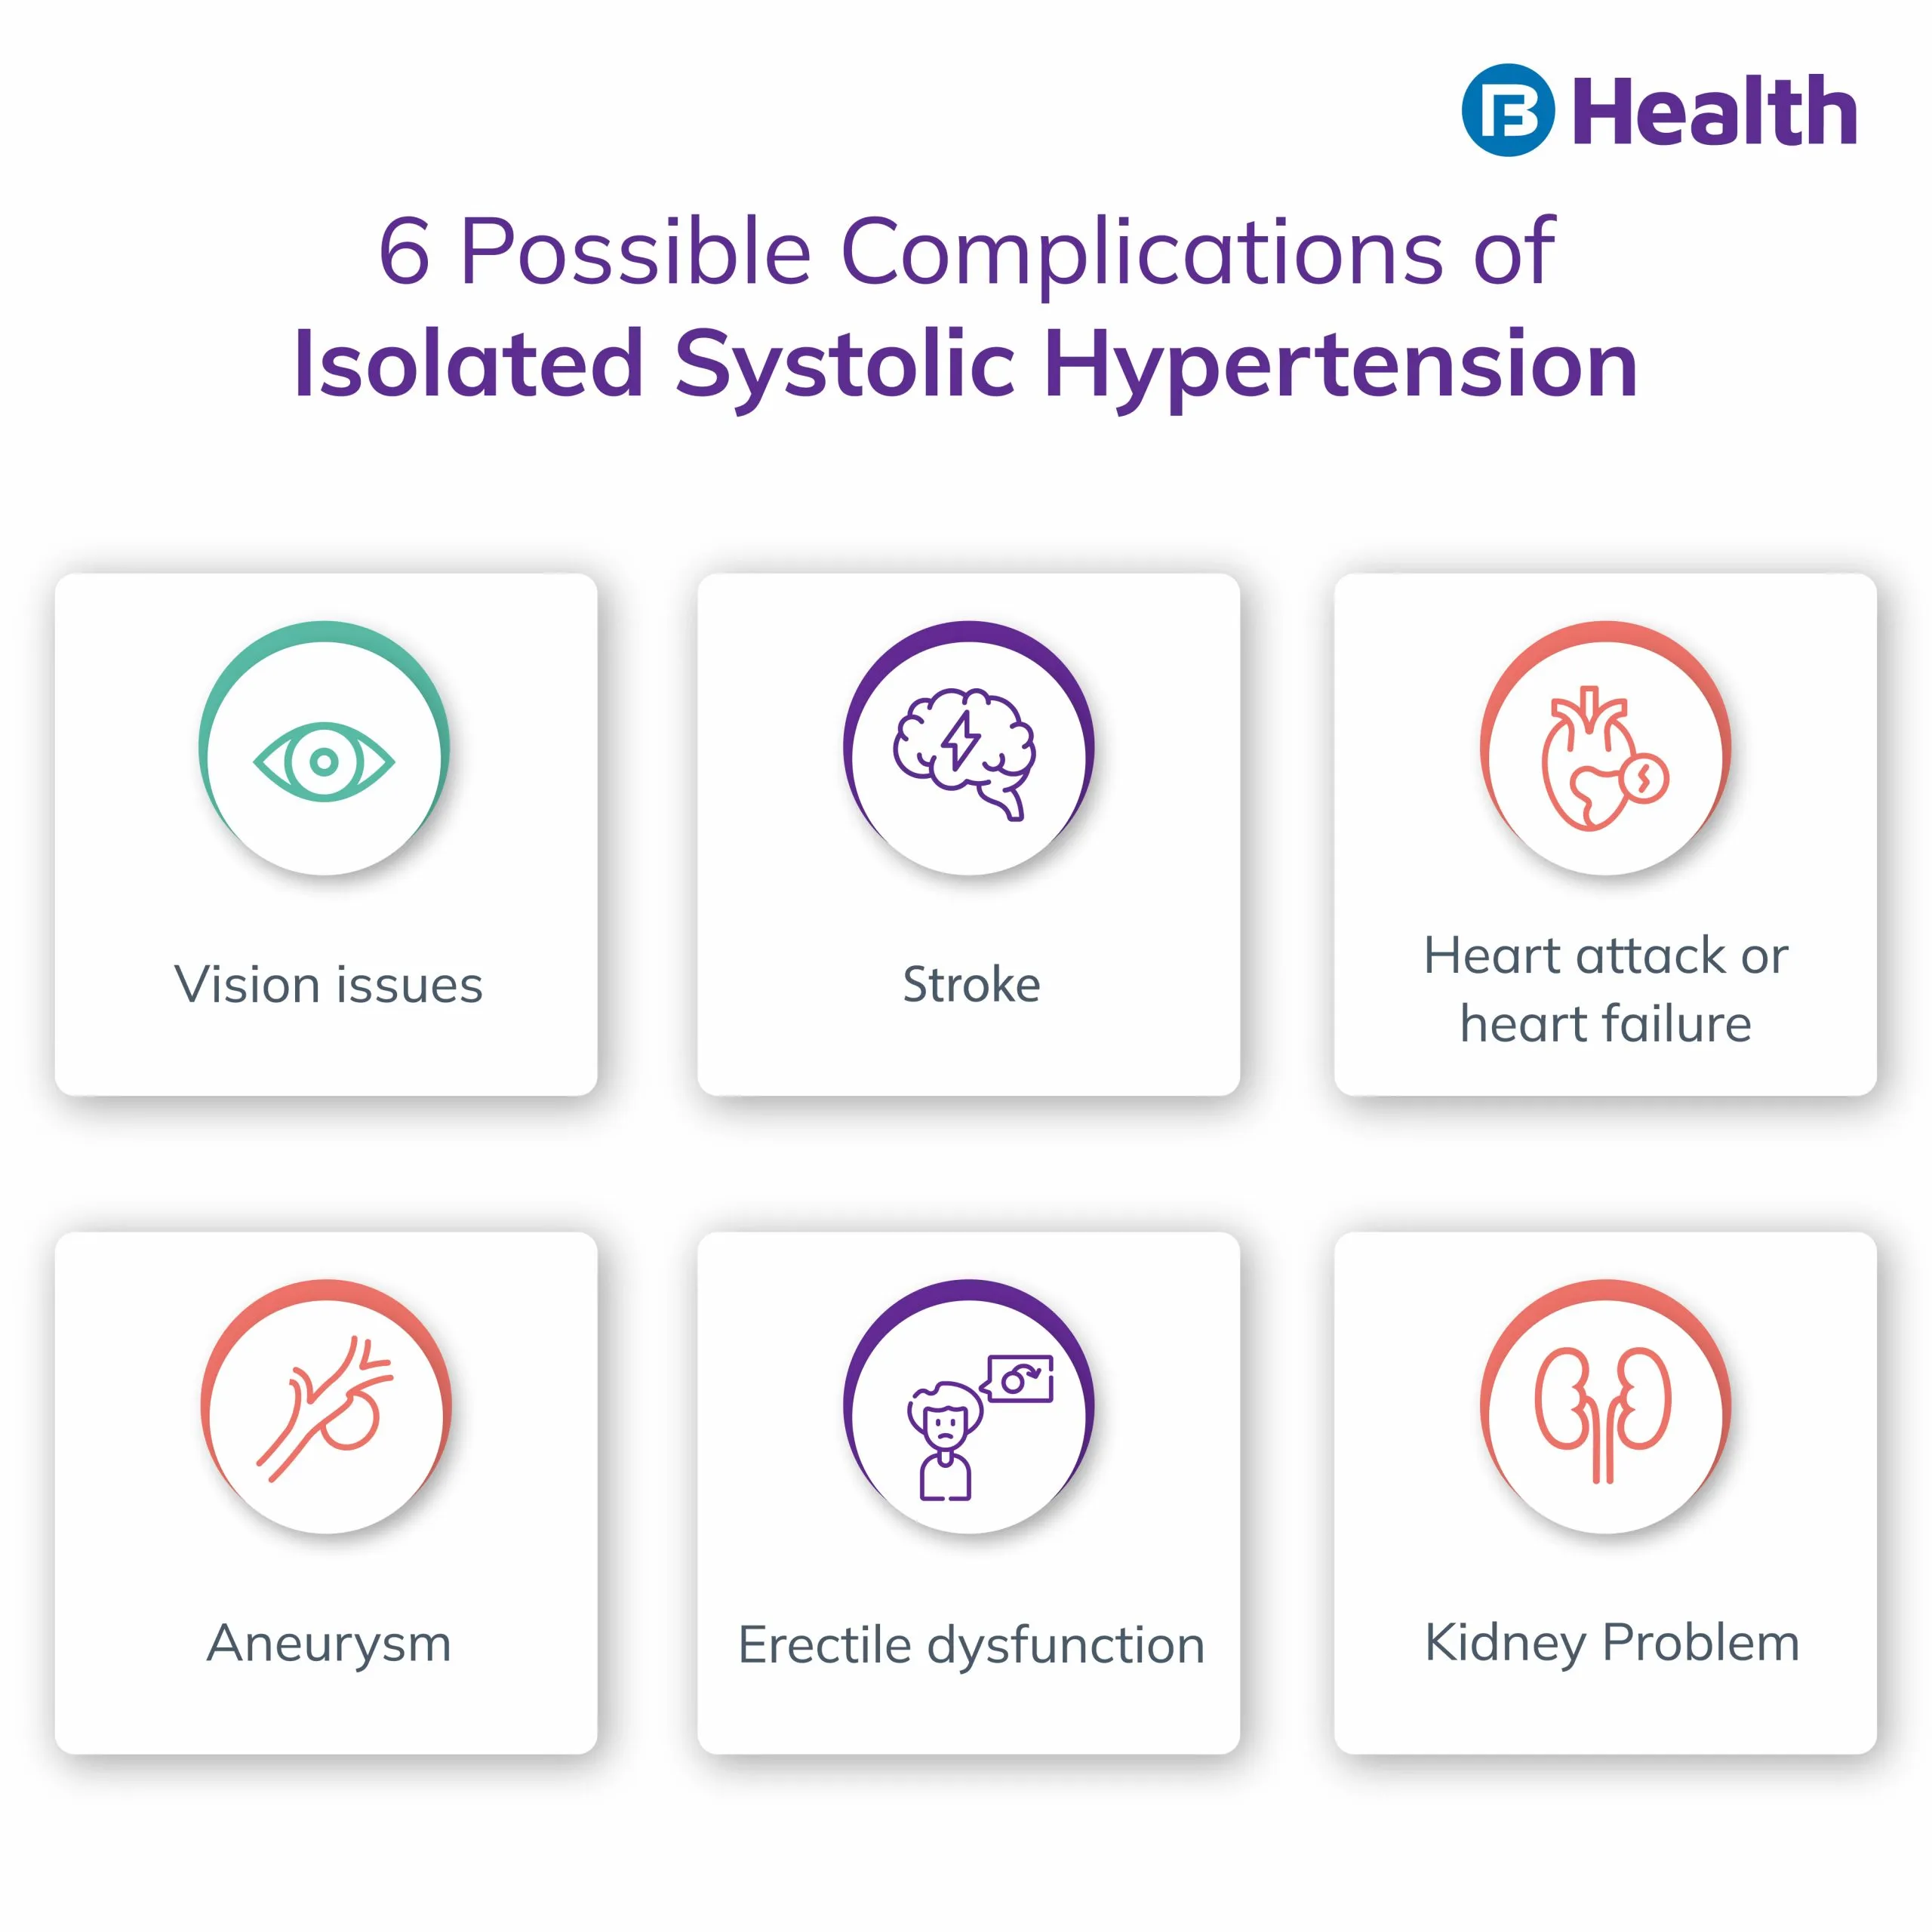 Isolated Systolic Hypertension complications